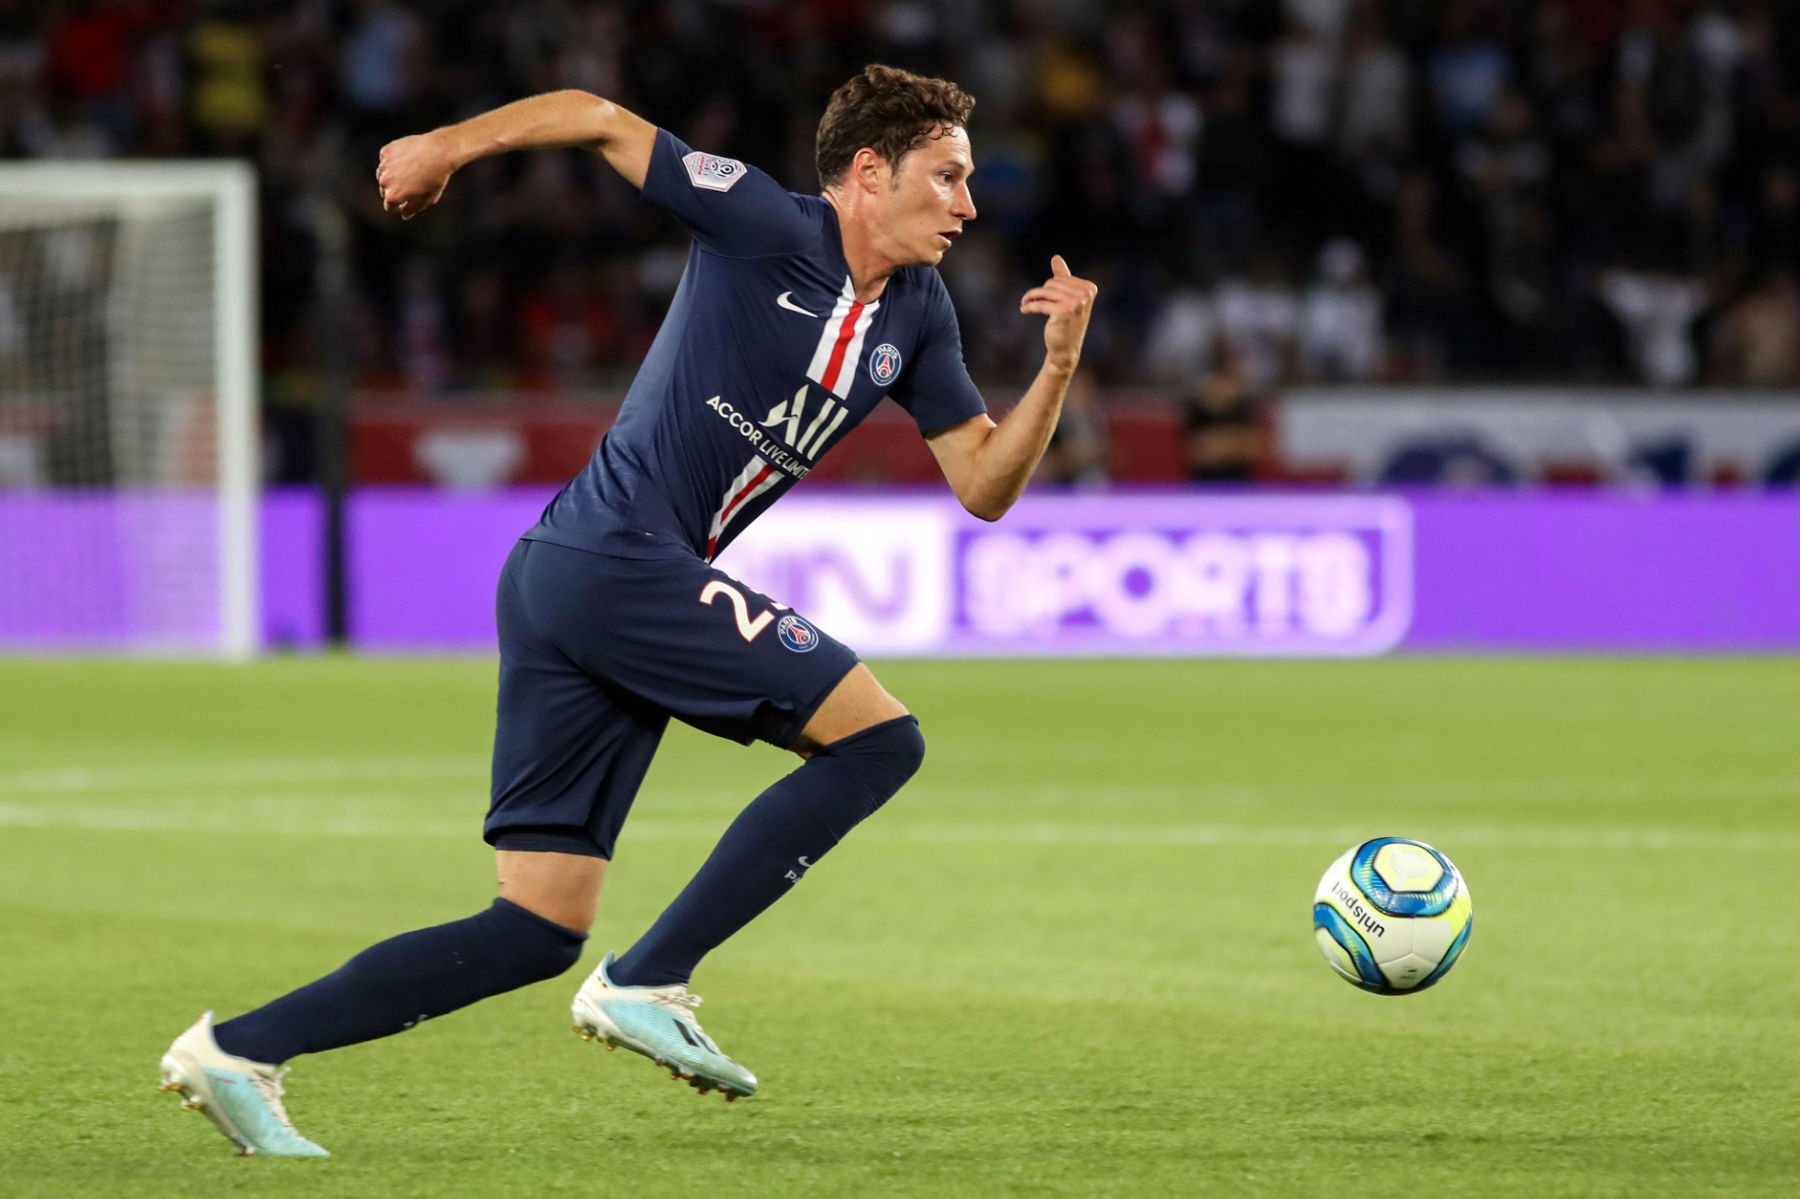 Report: PSG Is Probing the Market to Find a Suitor for Draxler - PSG Talk